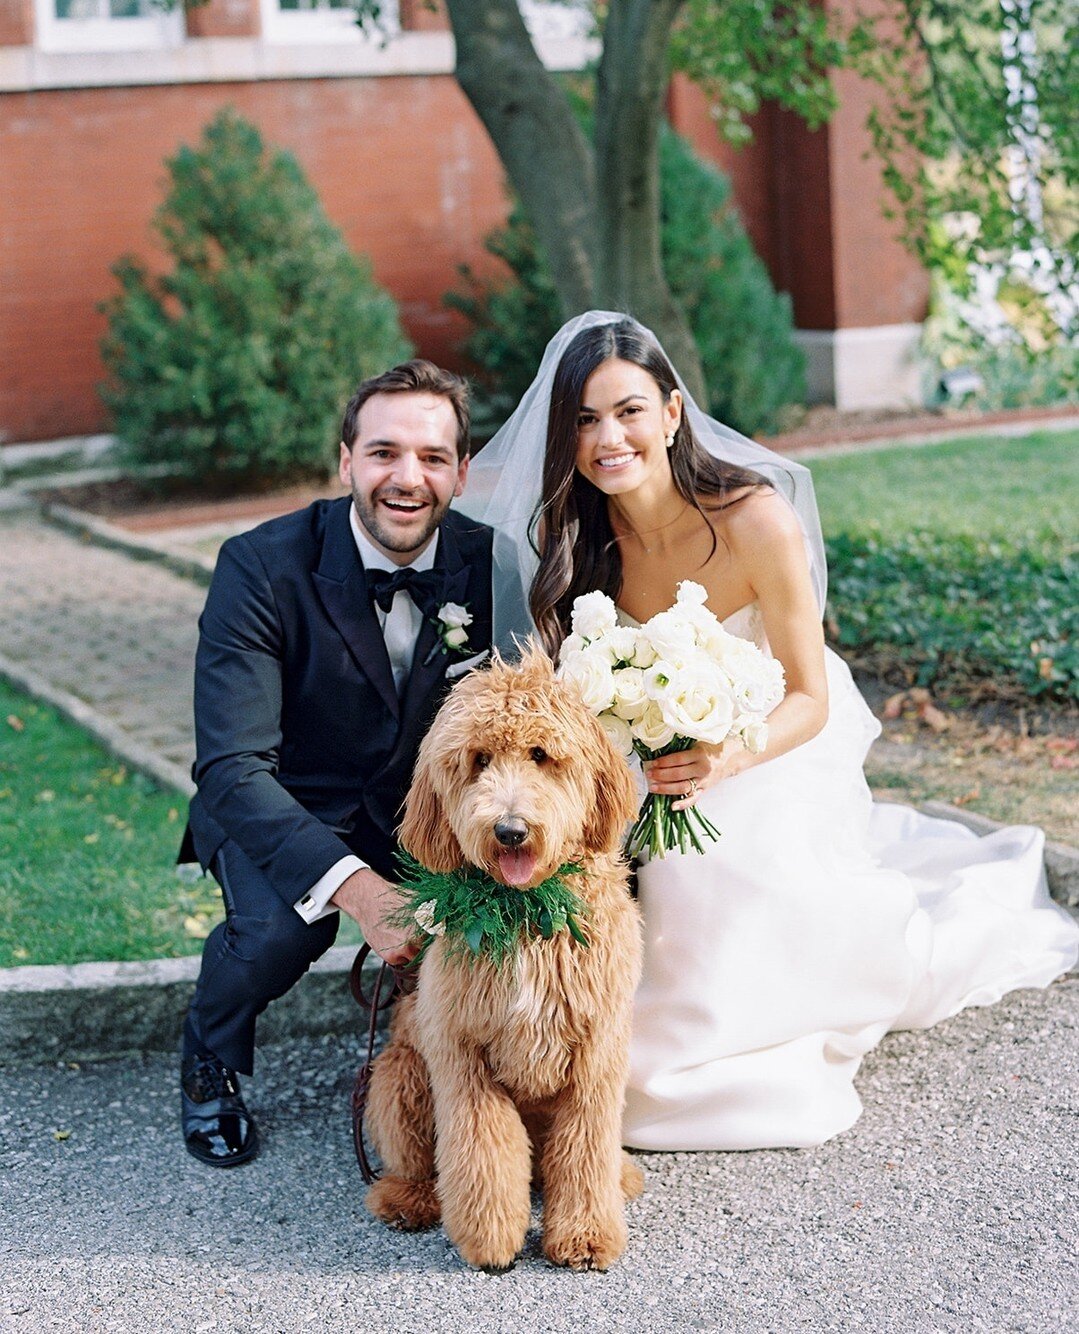 Even the furriest family members need florals to complete their wedding day look! 🐶⁠ Do you have plans to include your pup in your special day?⁠
⁠
Photo: @nataliebrayphoto